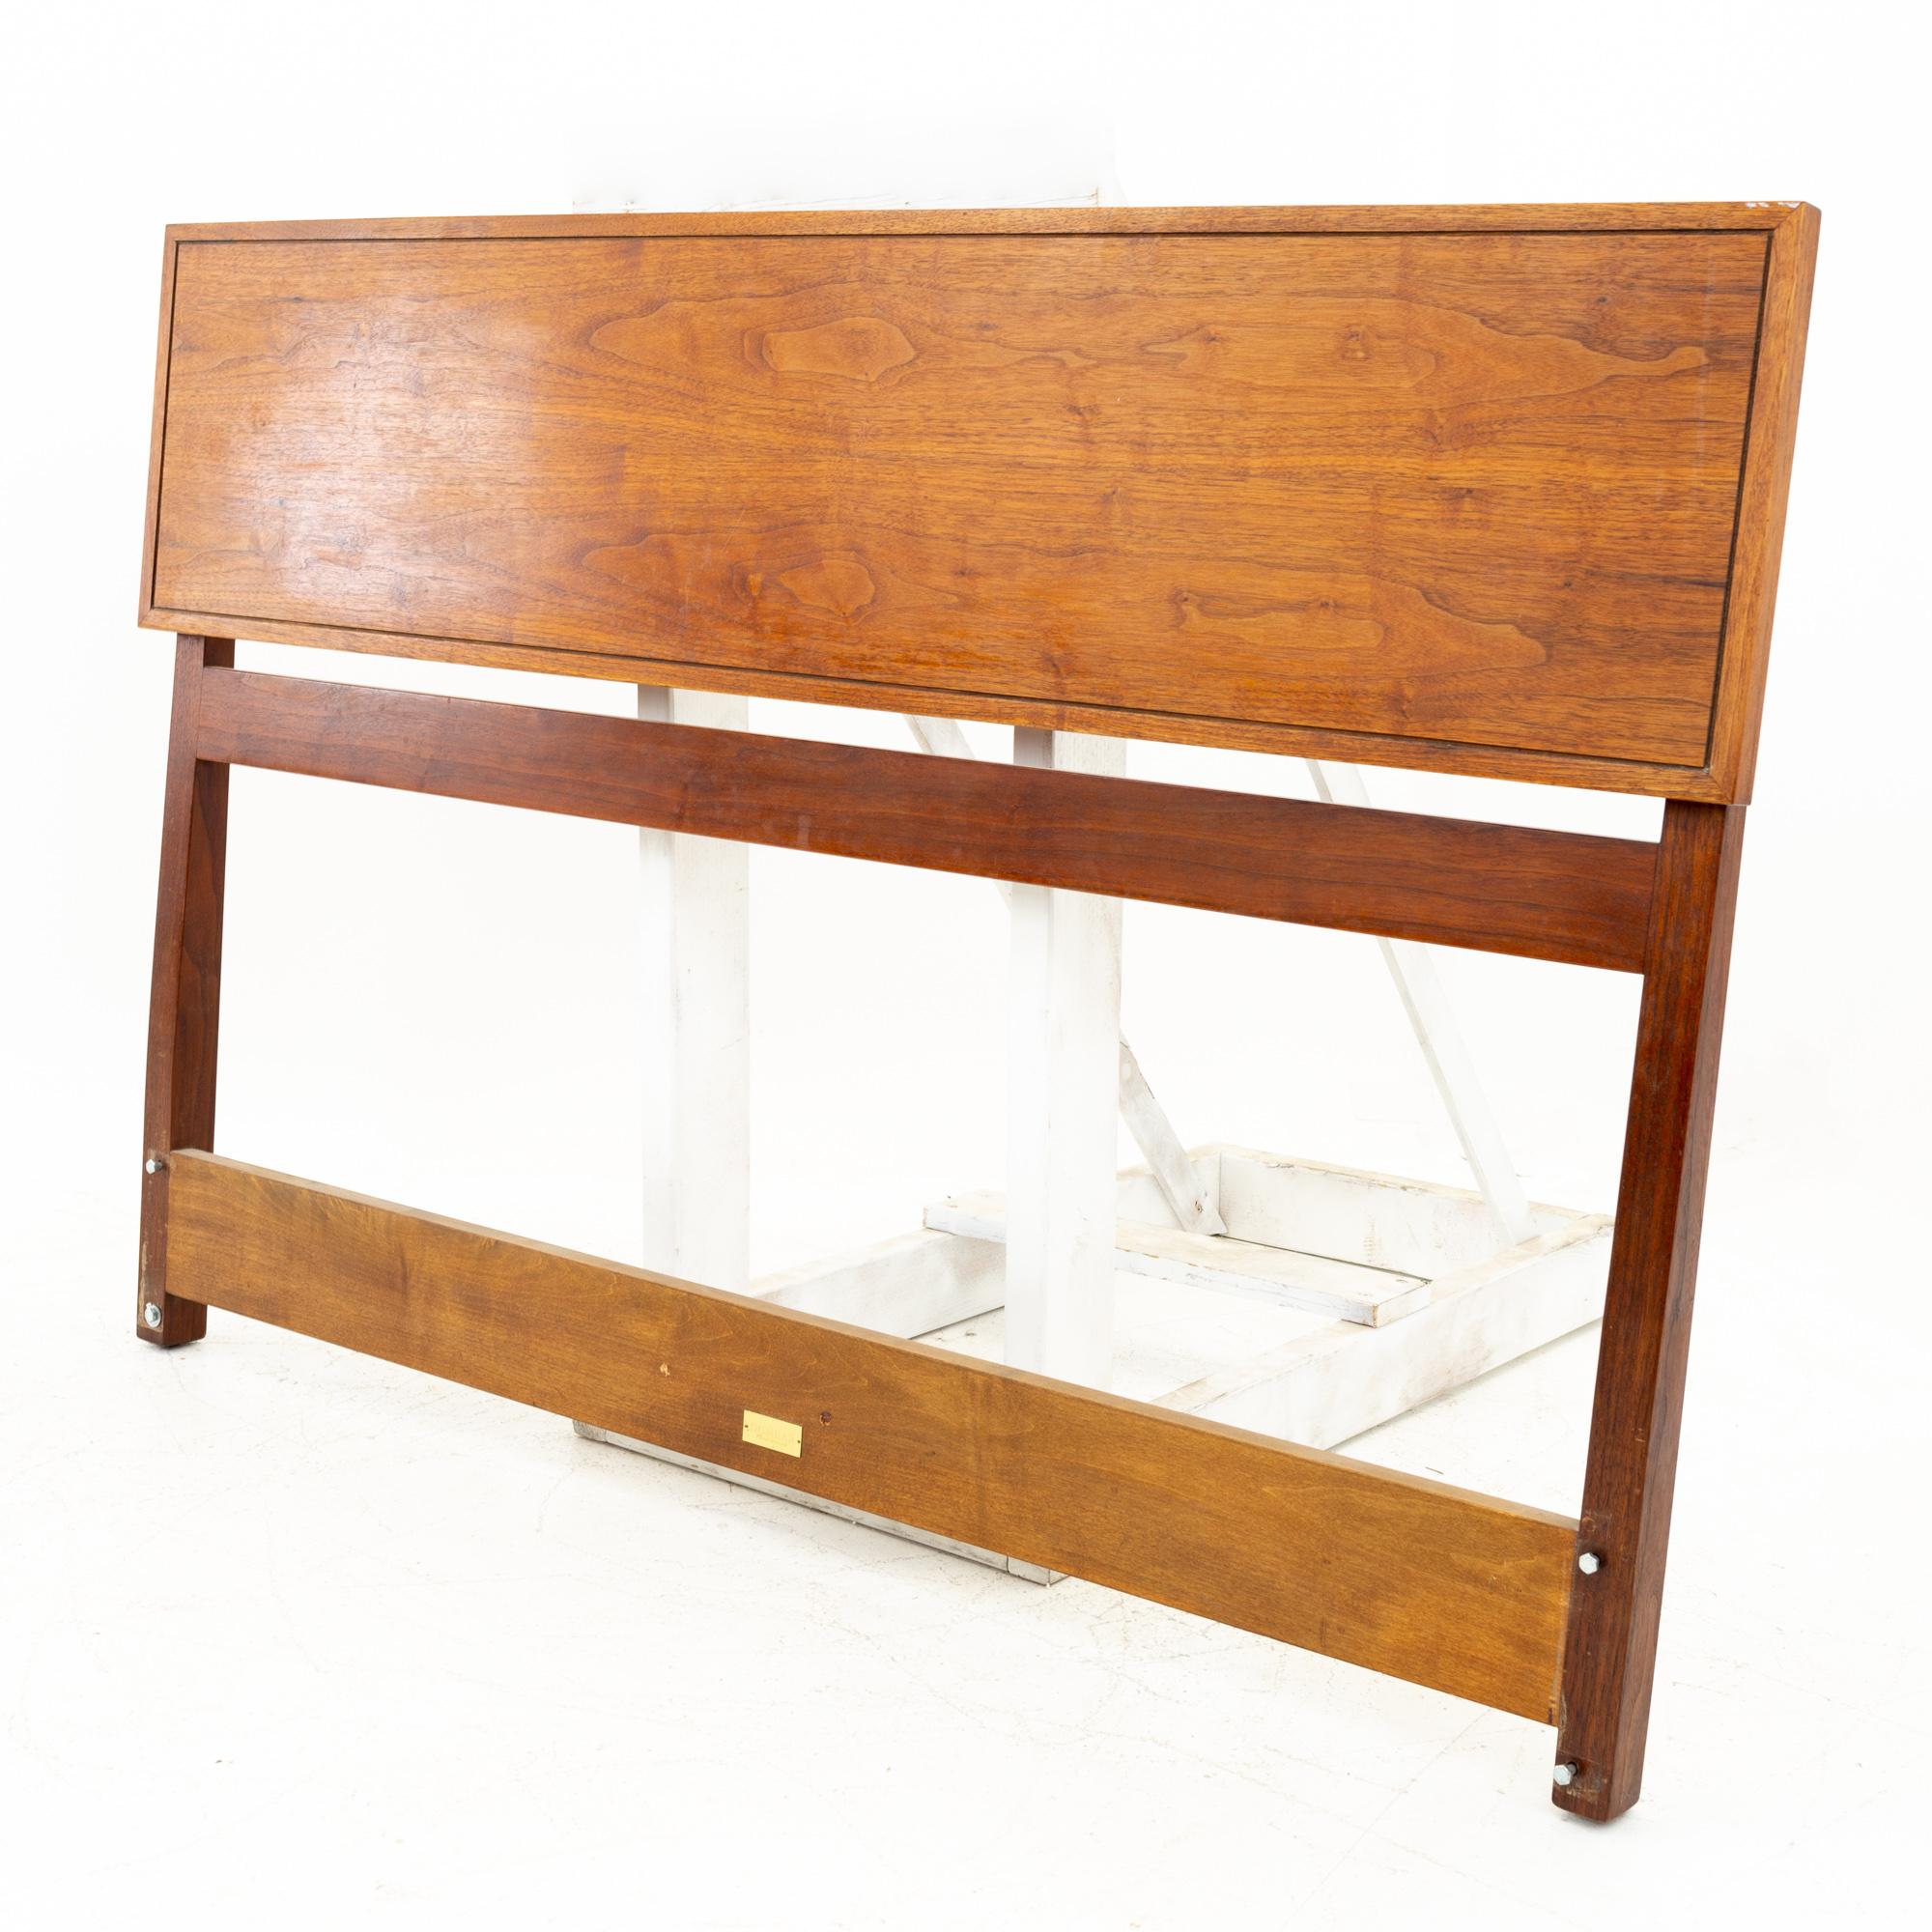 Edward Wormley for Dunbar mid century walnut rosewood and brass headboard
This headboard is 55 wide x 2.5 deep x 37.5 inches high

All pieces of furniture can be had in what we call restored vintage condition. That means the piece is restored